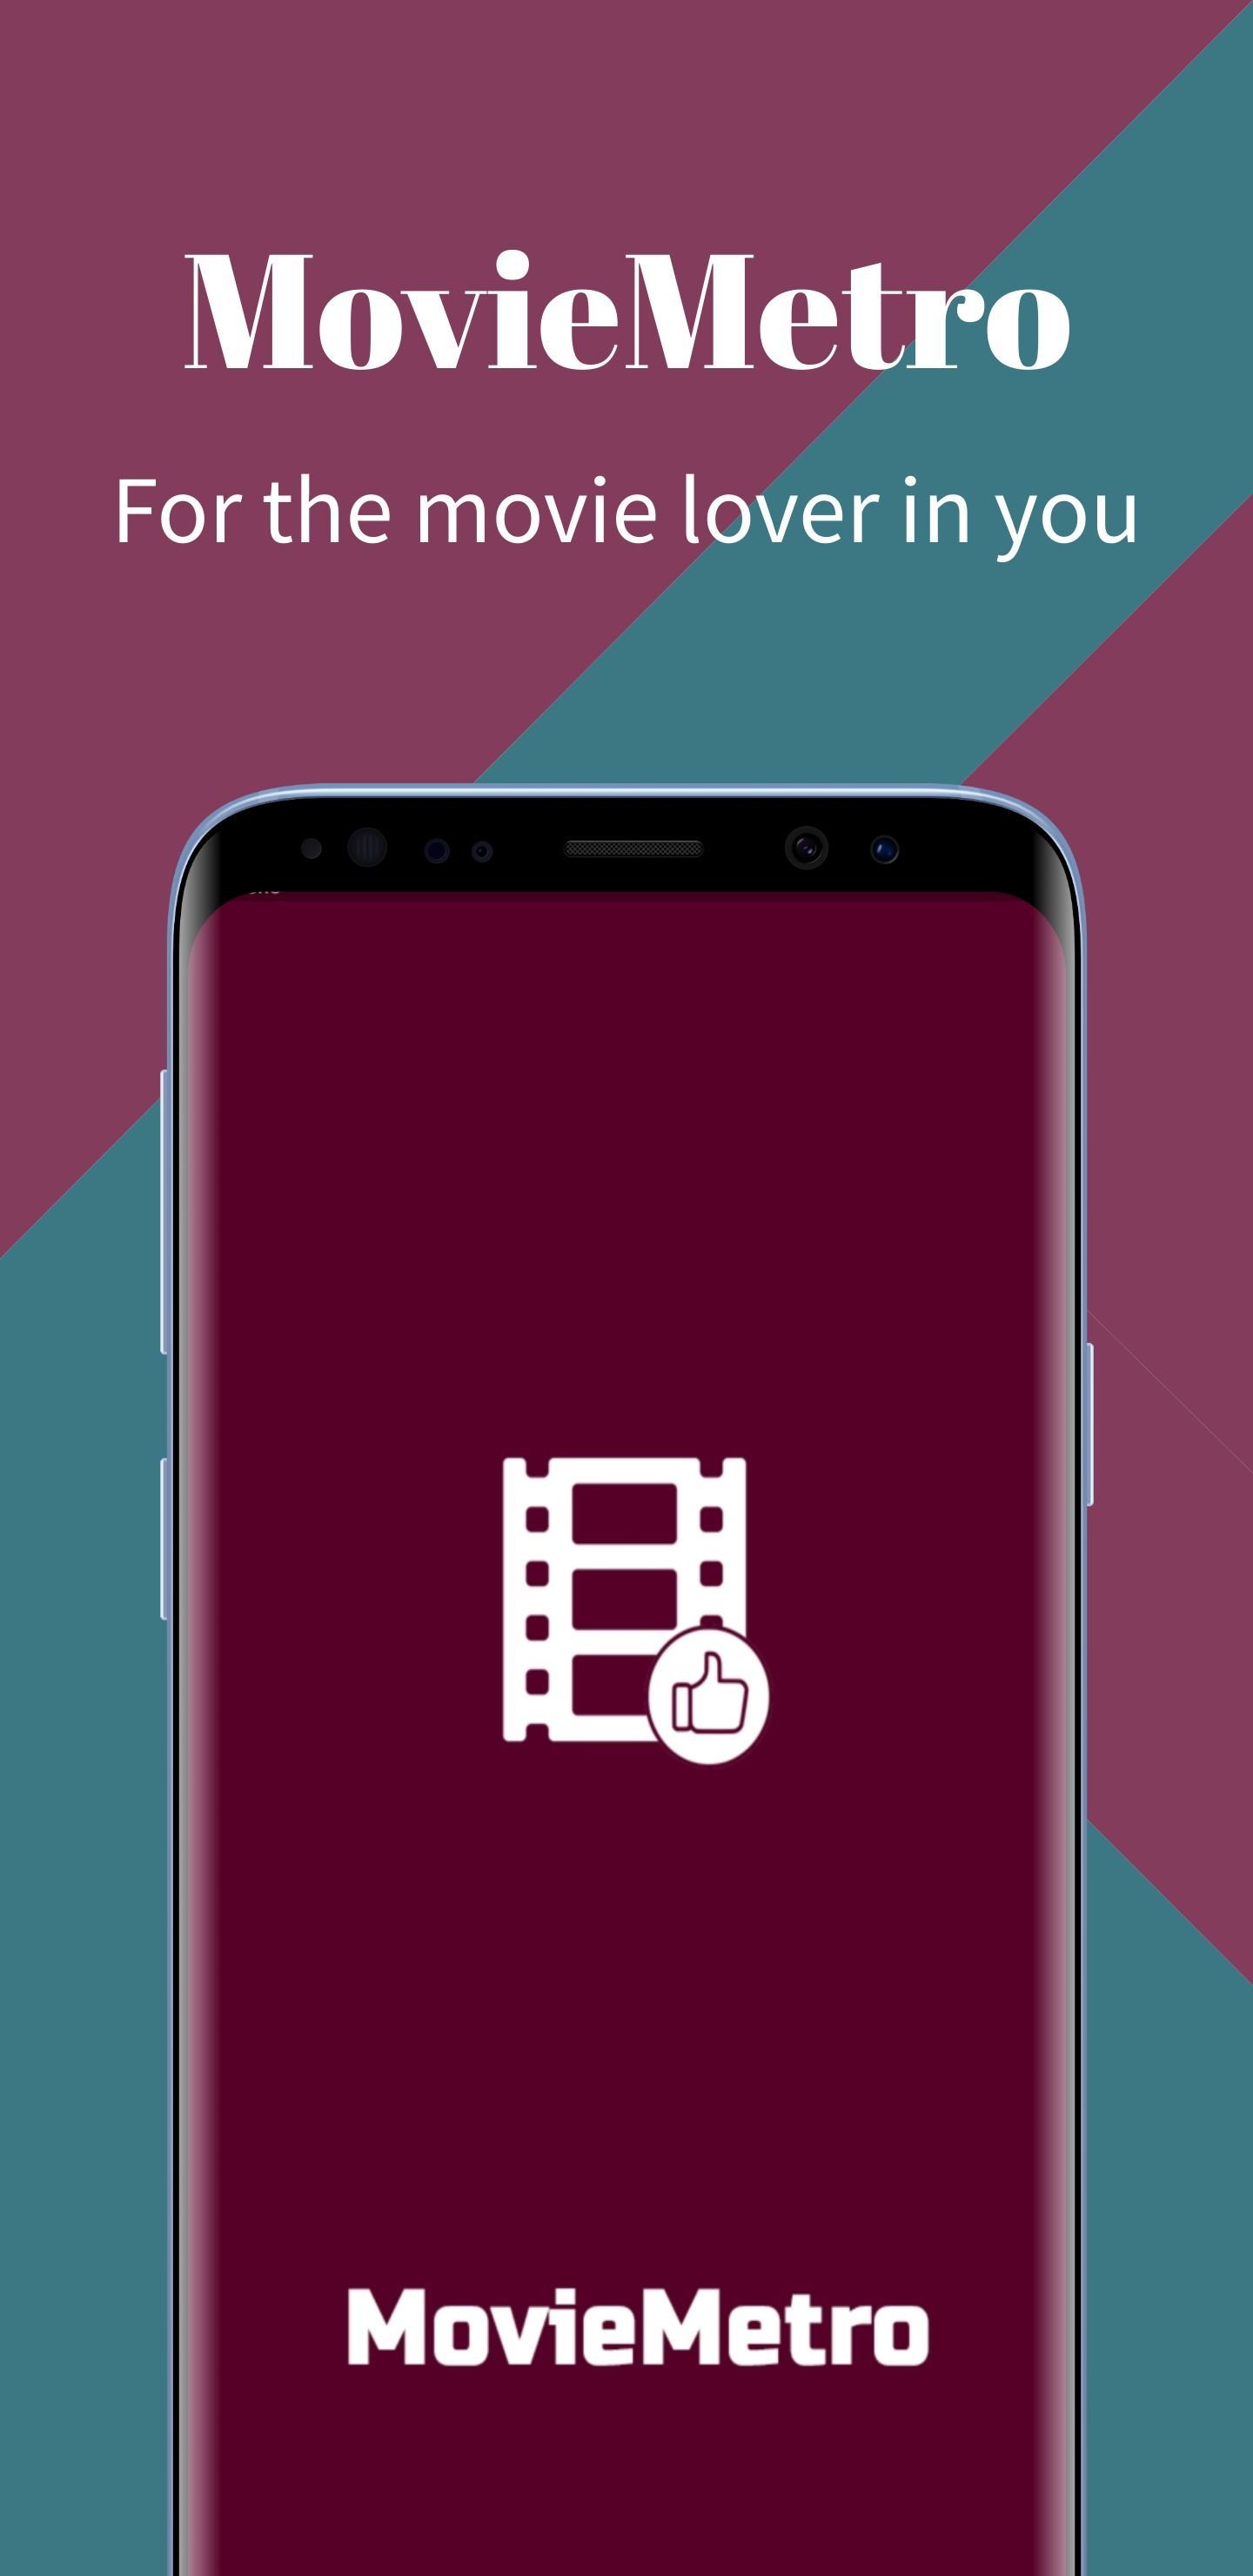 Samsung S9 Screenshot 27 template. Quickly edit text, colors, images, and more for free.